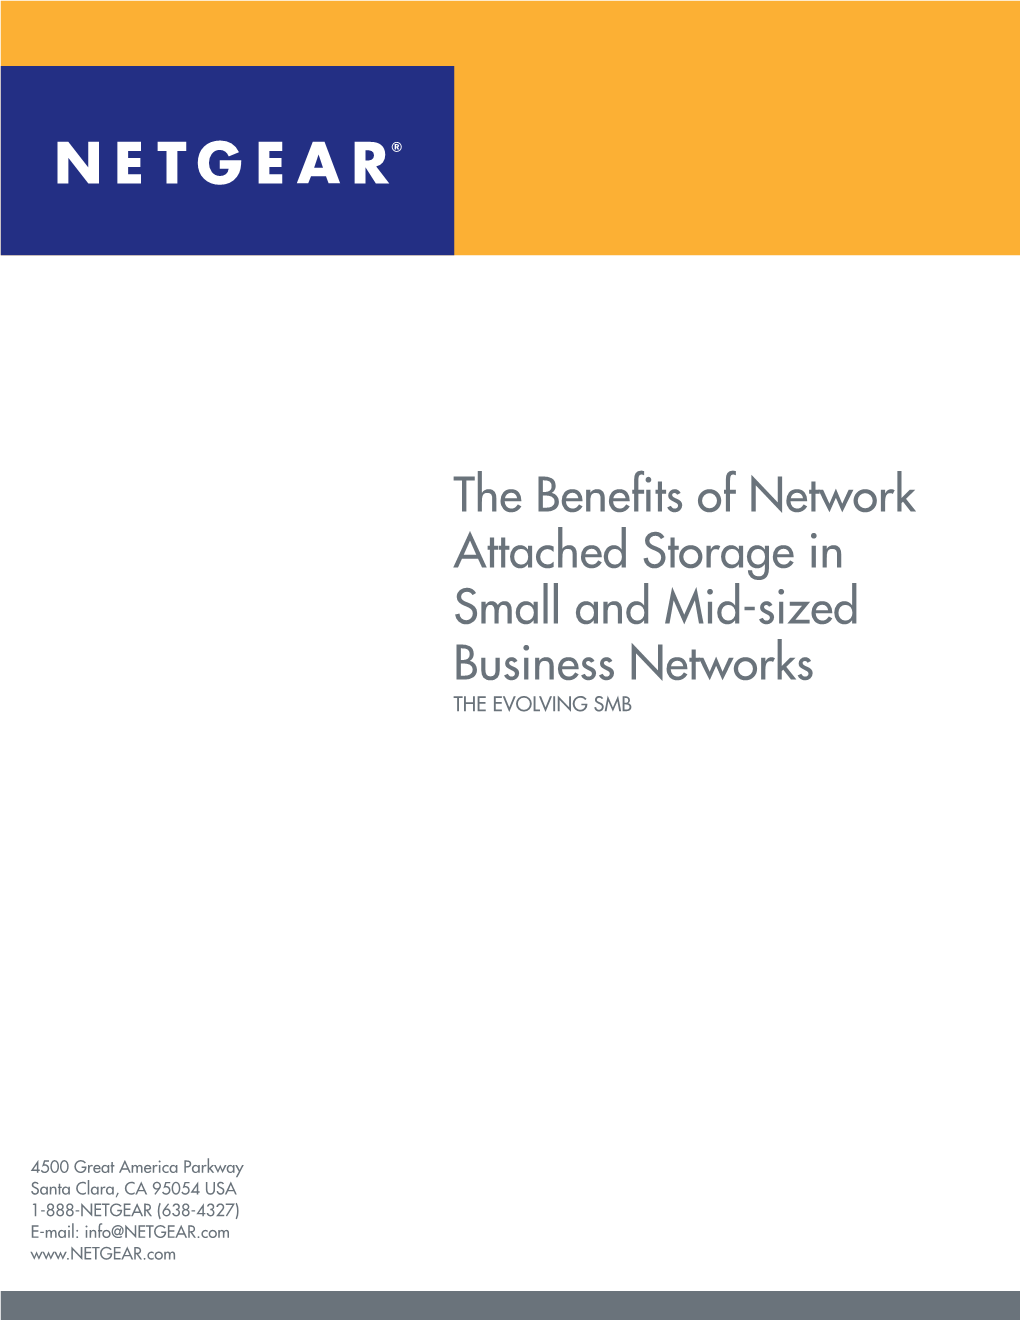 The Benefits of Network Attached Storage in Small and Mid-Sized Business Networks the EVOLVING SMB